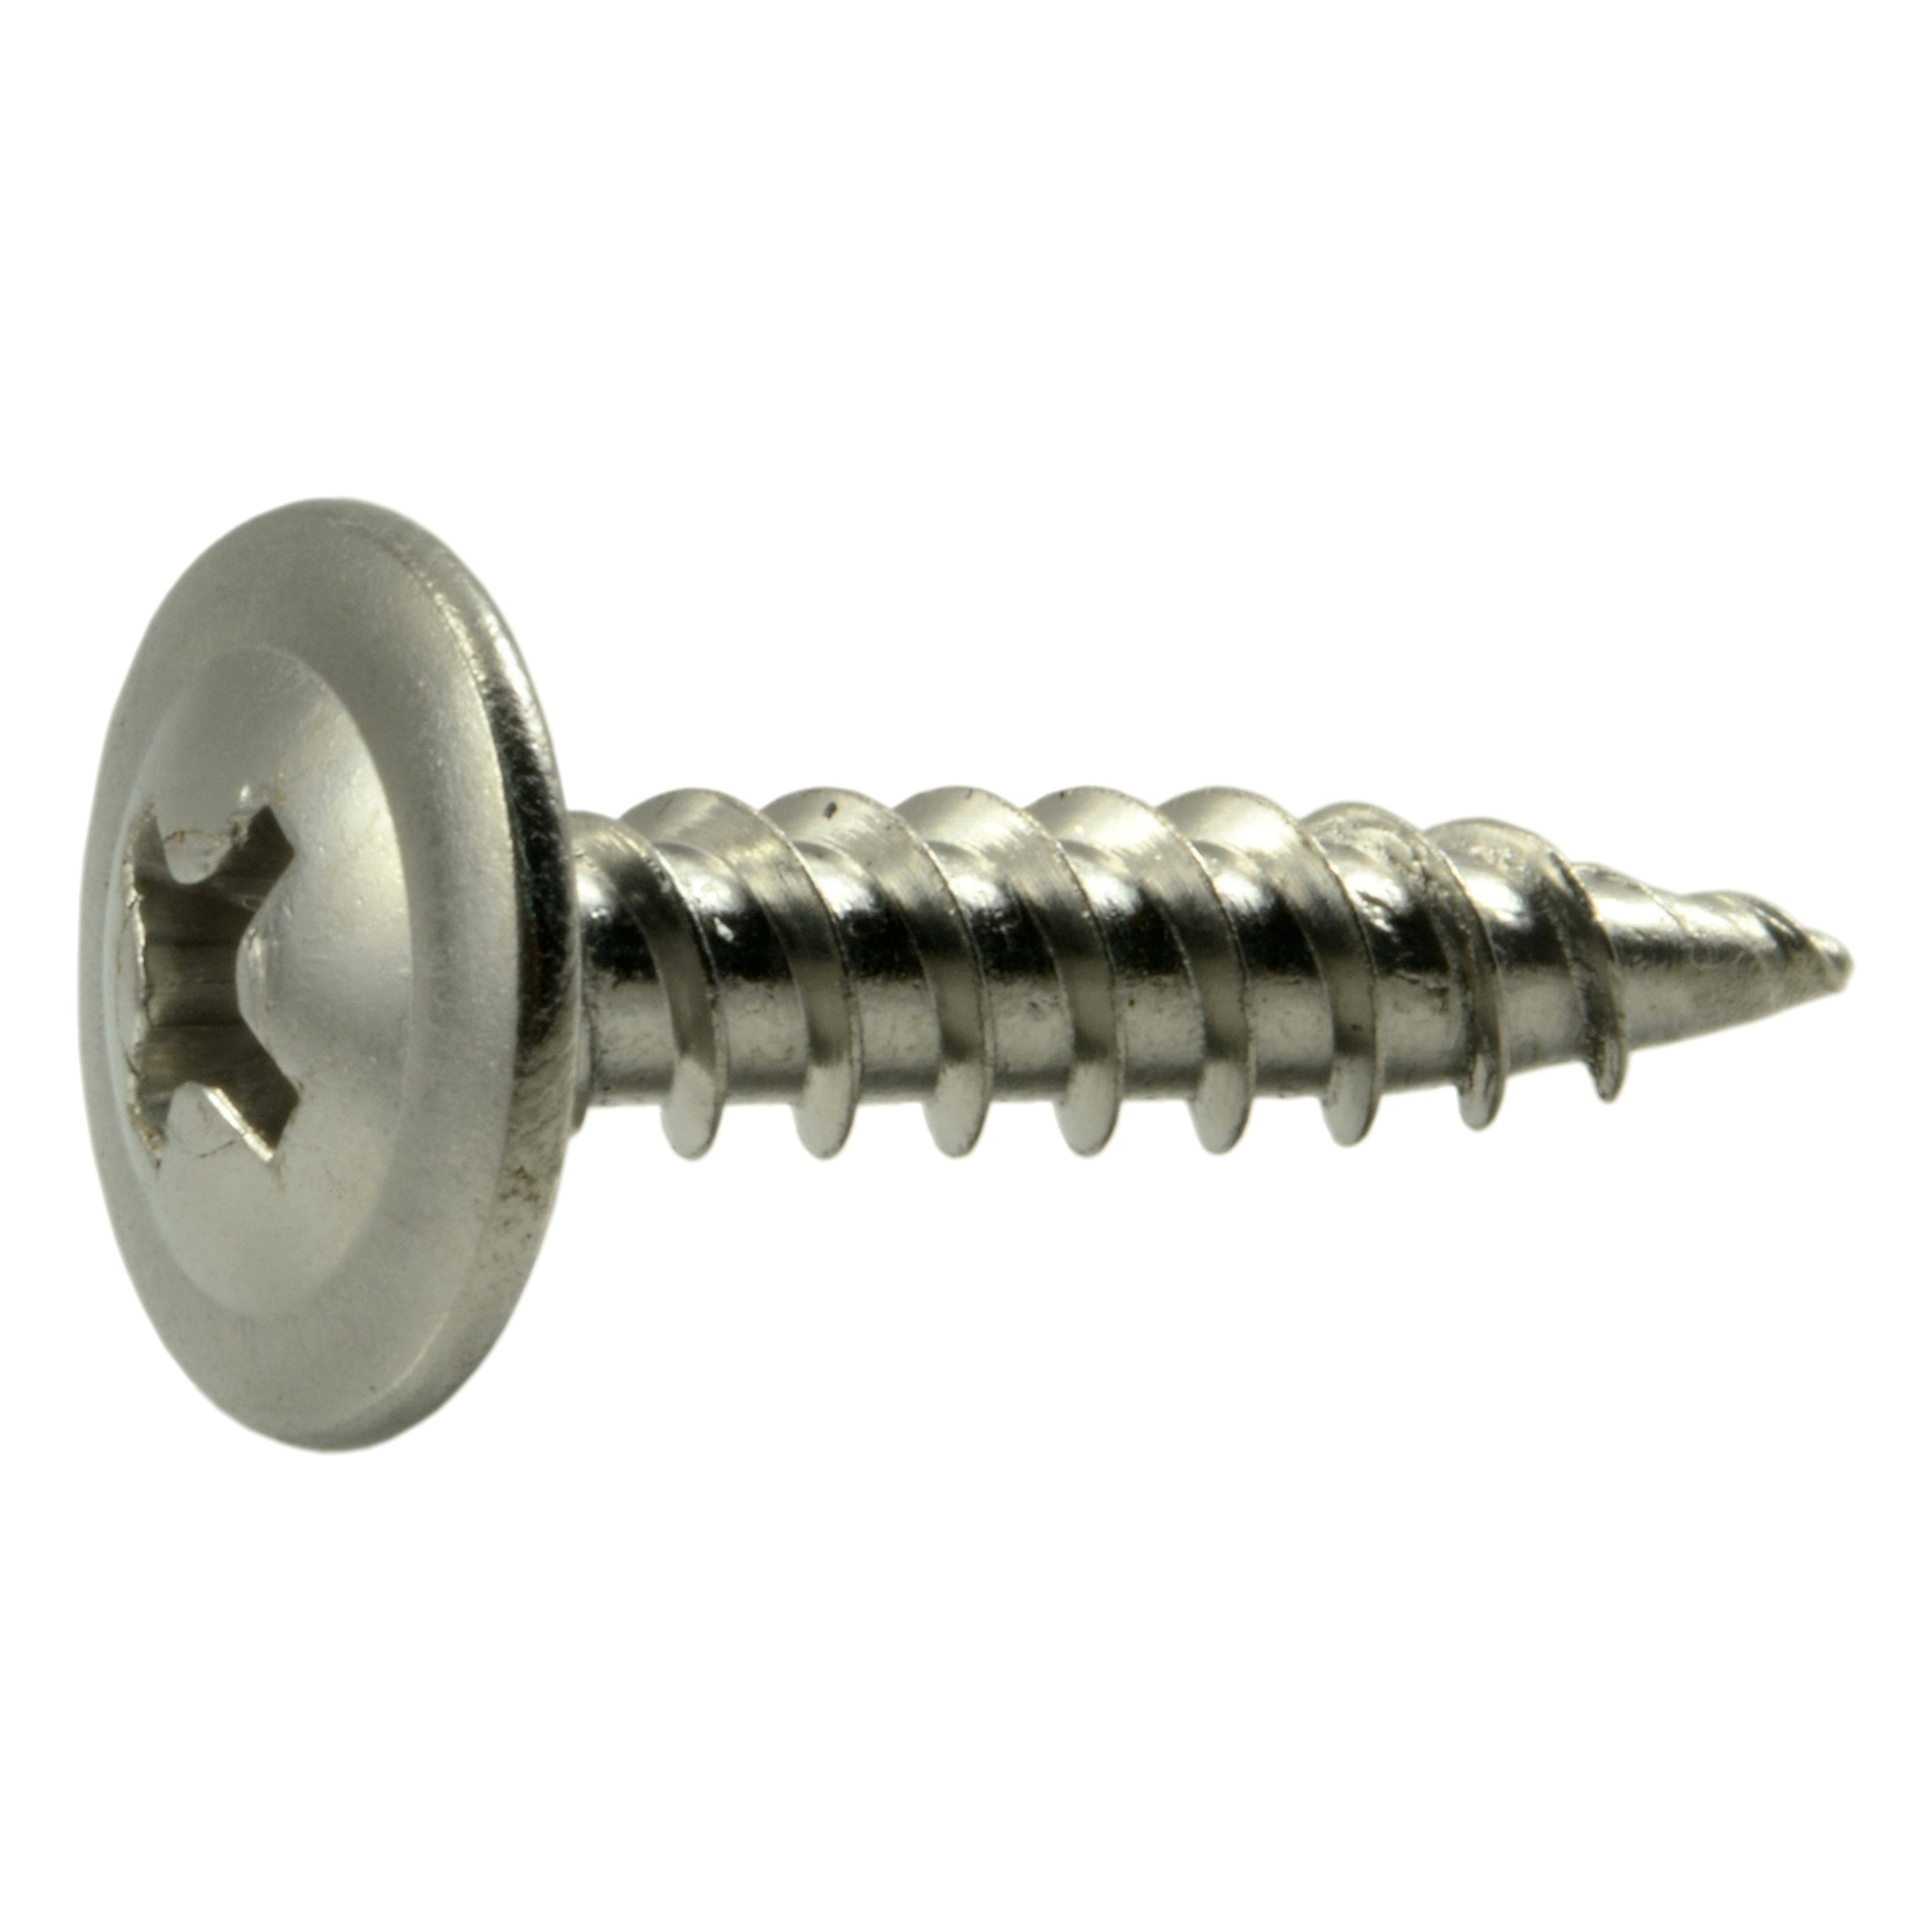 Phillips Oval Head Sheet Metal Screw 316 Stainless Steel #8 x 1-3/4" Qty 50 